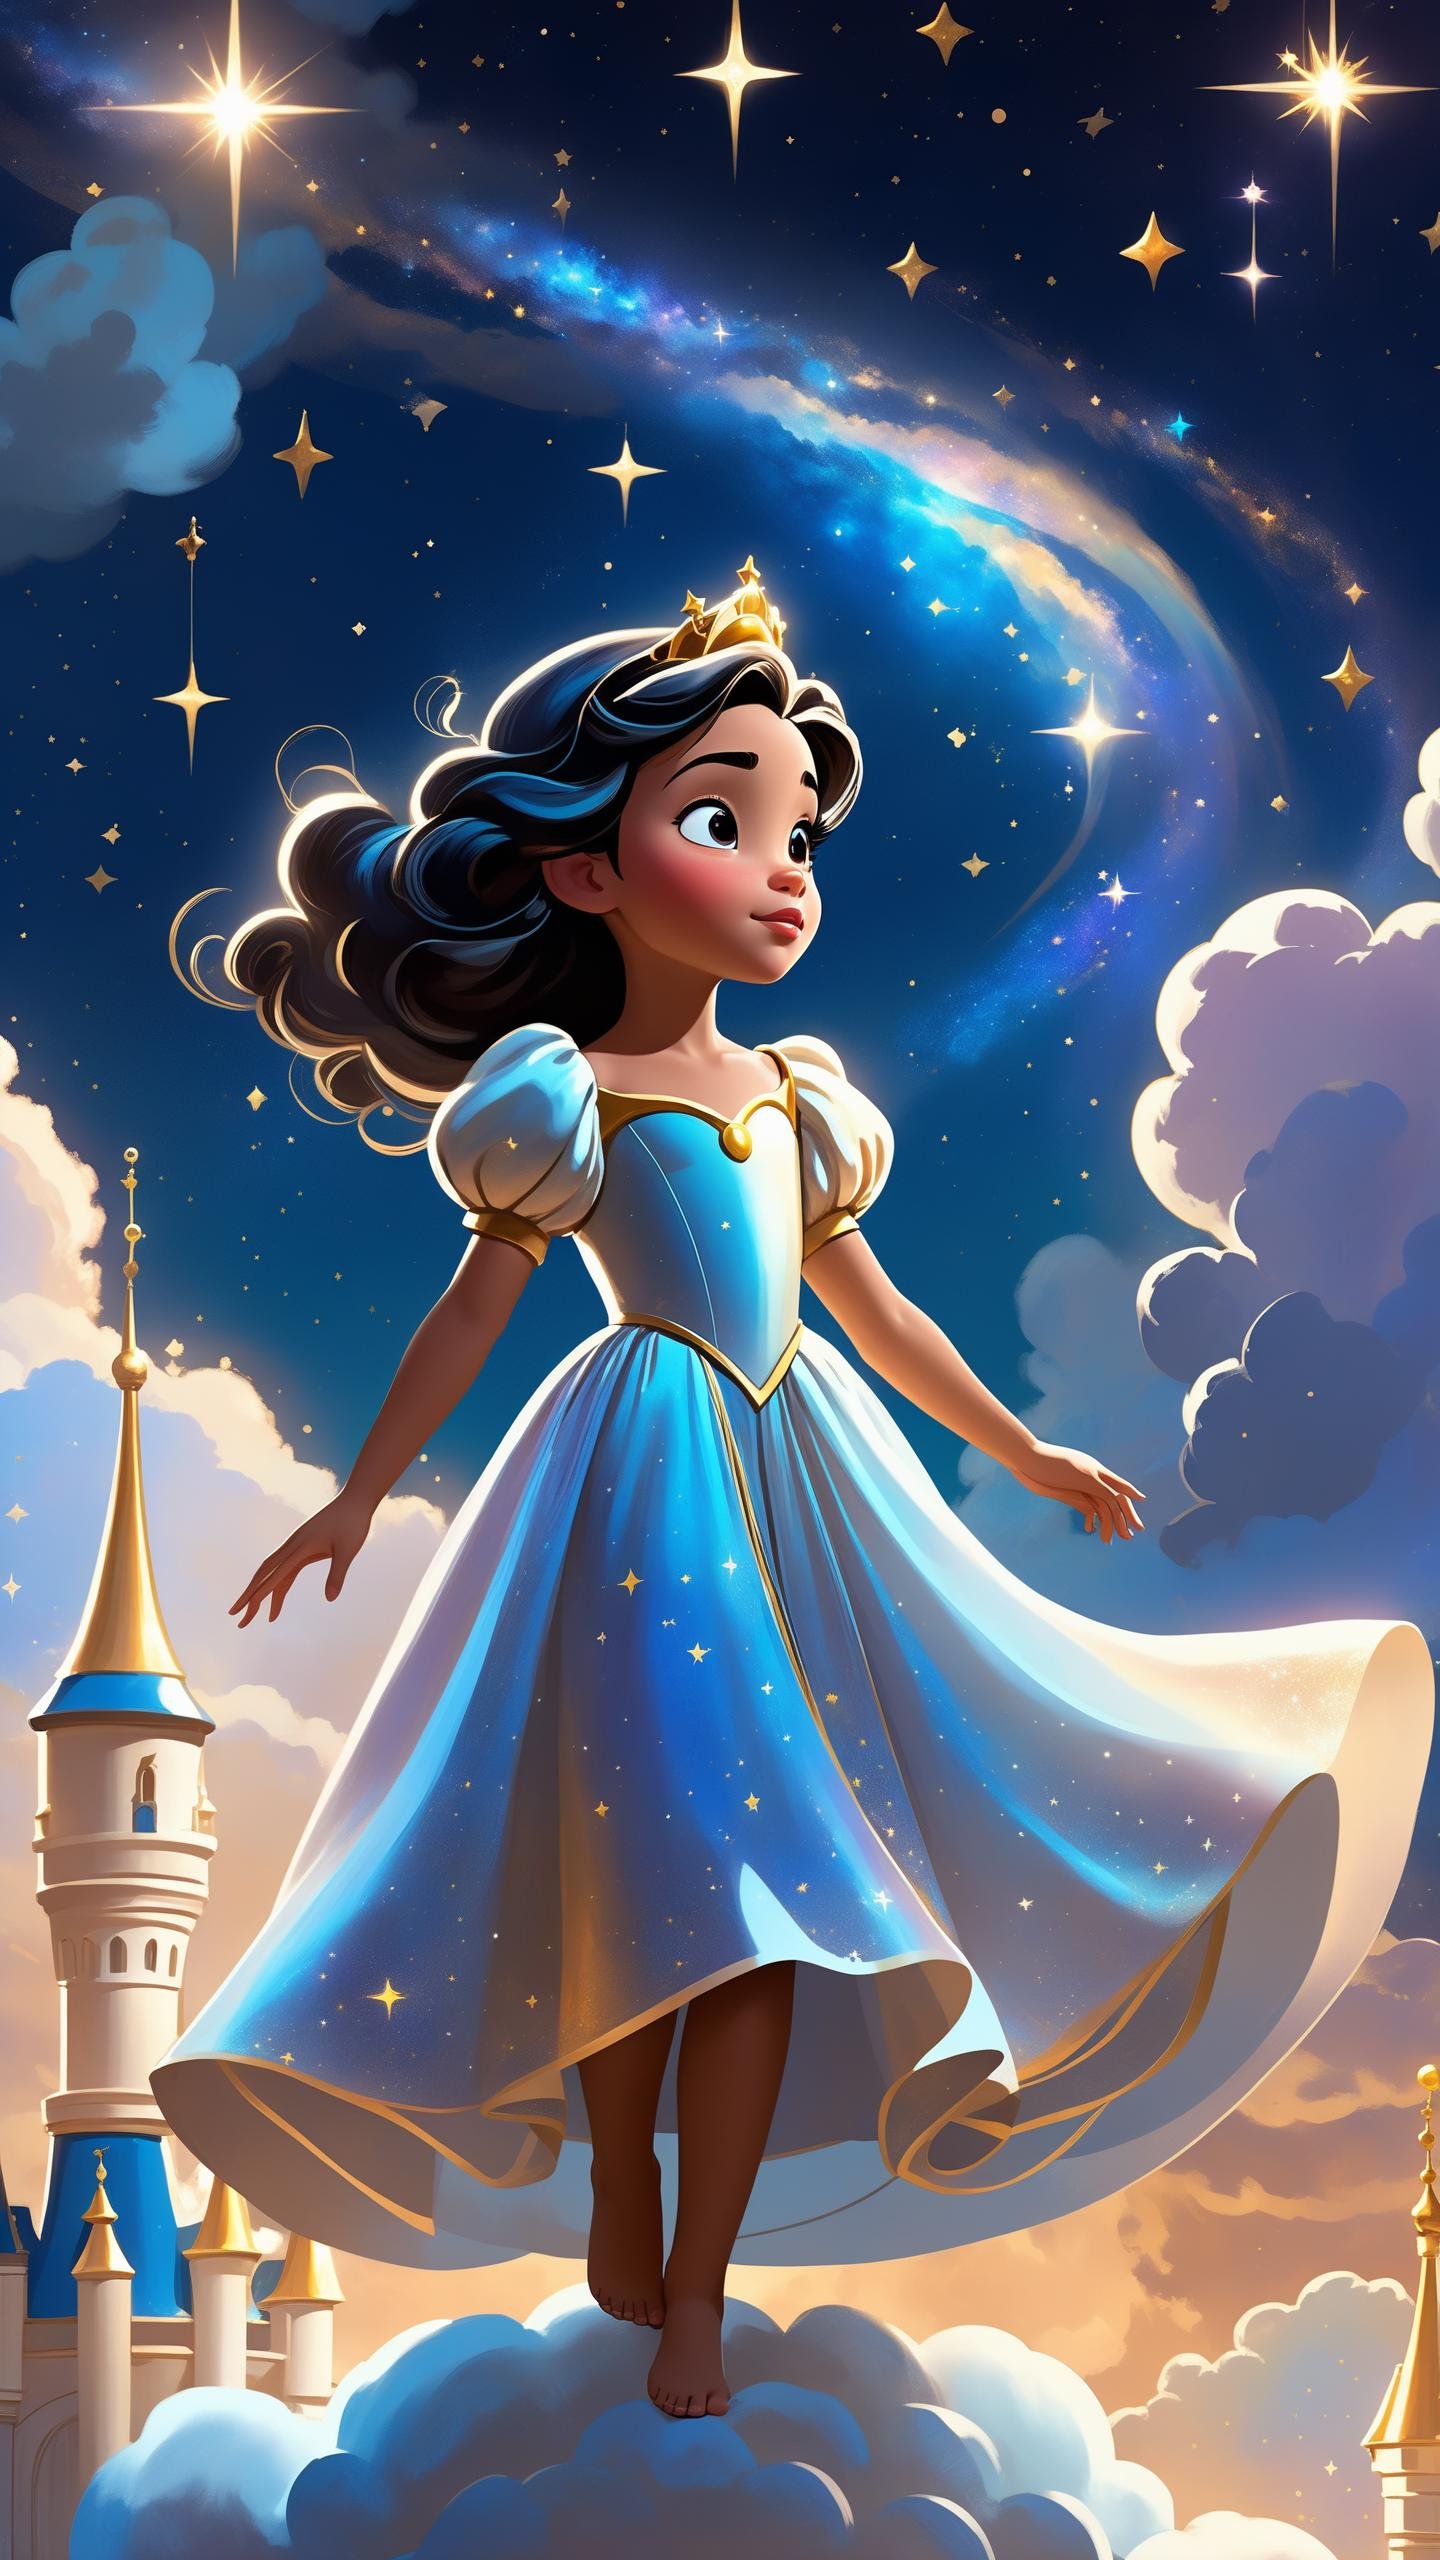 "Disney style, a beautiful young girl princess in a shimmering, starry robe, residing in a celestial palace atop a floating cloud in the skies, where she watches over the dreams and wishes of children around the world. soft outlines, perfect eyes, dark pupils, magnificent, celestial, ethereal, painterly, epic, majestic, magical, fantasy art, dreamy, unique pose, dynamic pose